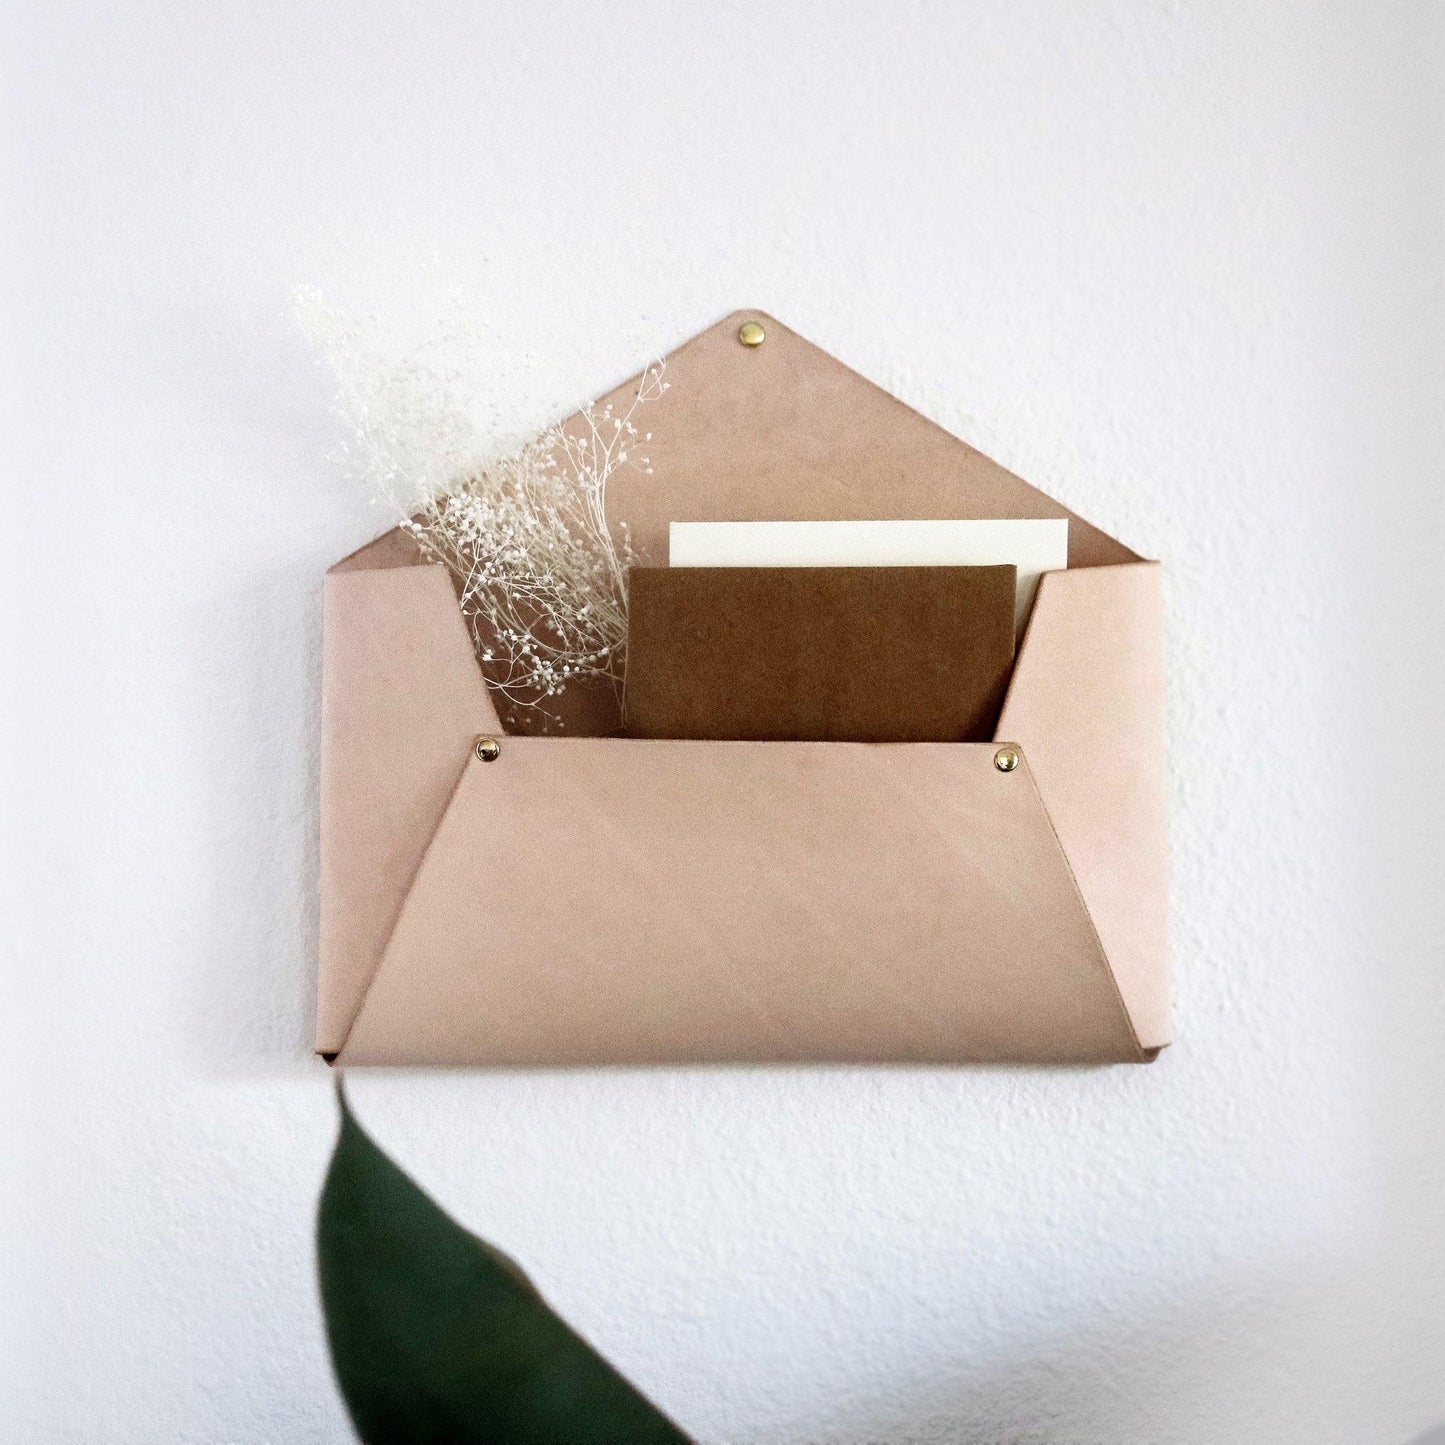 Leather wall-hanging mail holder. Beige vegetable-tanned handmade leather wall pocket